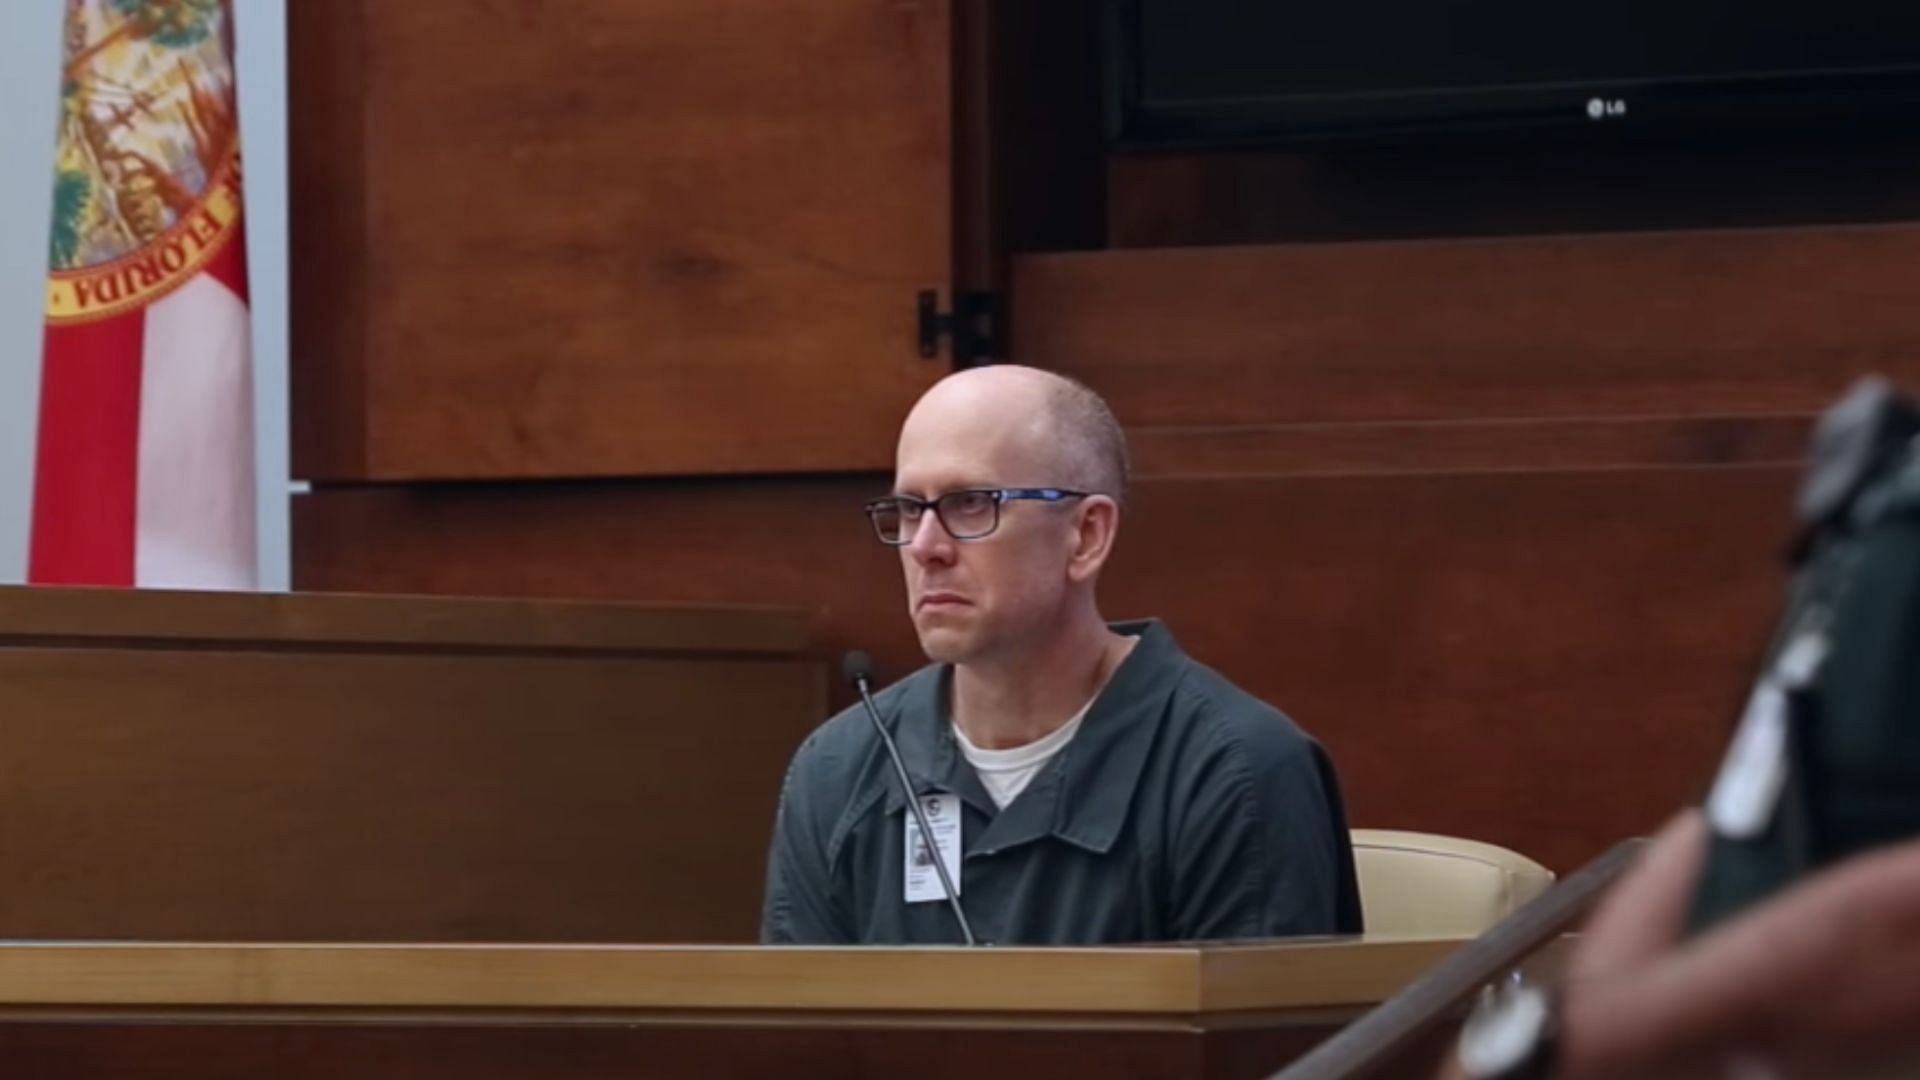 James Flanders at the court (Image via YouTube)